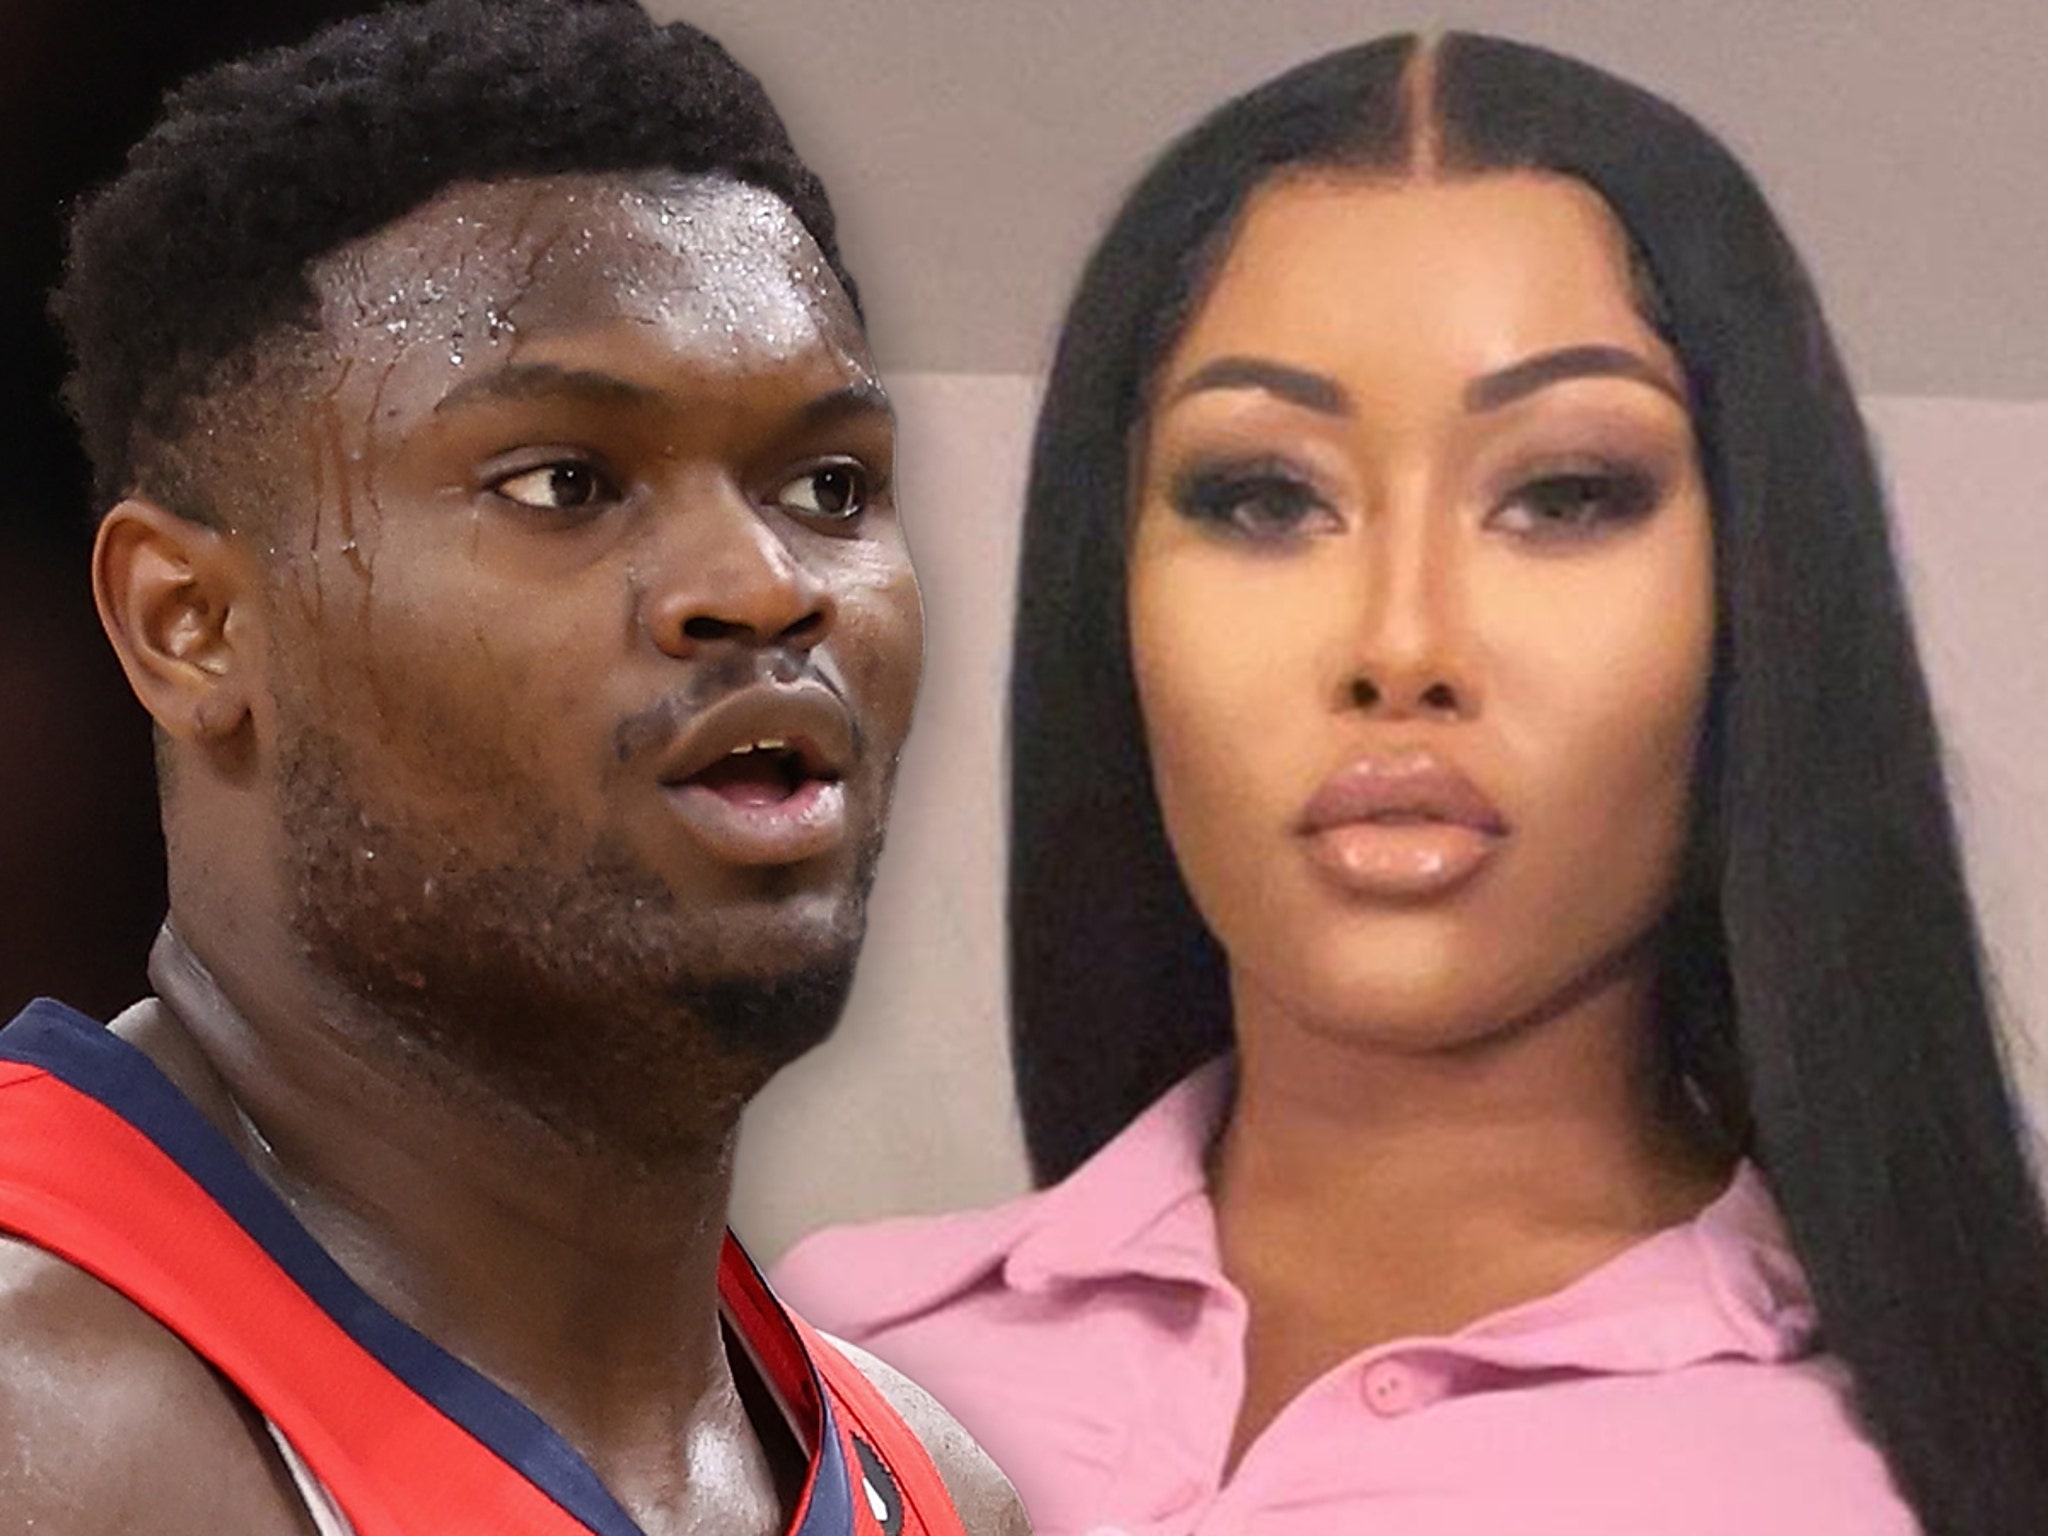 Babyxxx - Zion Williamson Called Out By Porn Star, Better Pray I'm Not Pregnant, Too!